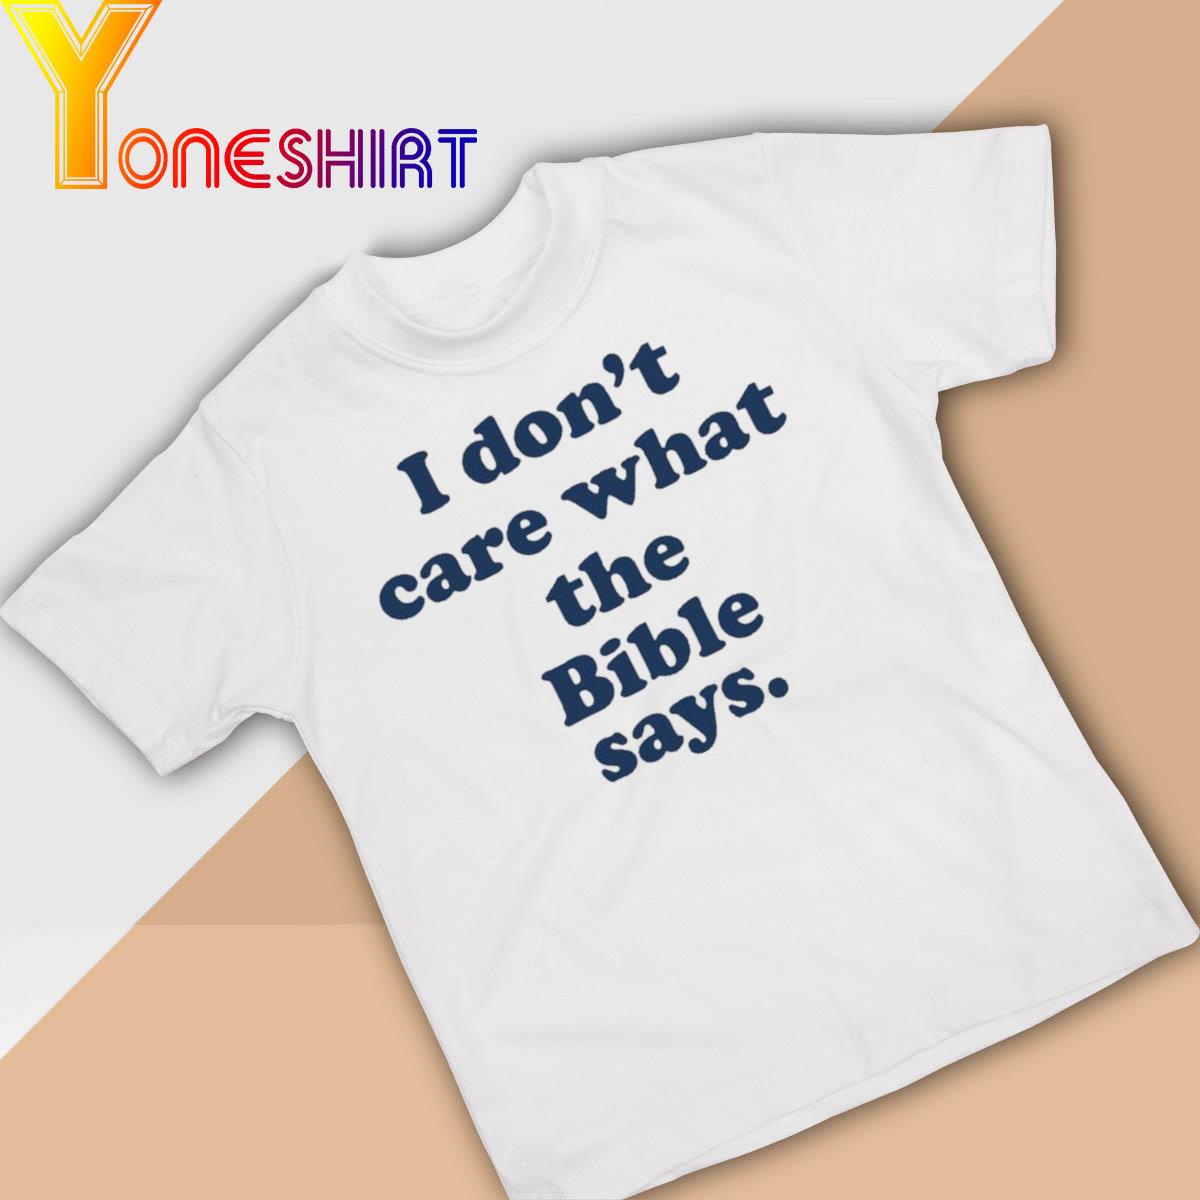 I Don't Care What The Bible Says Shirt